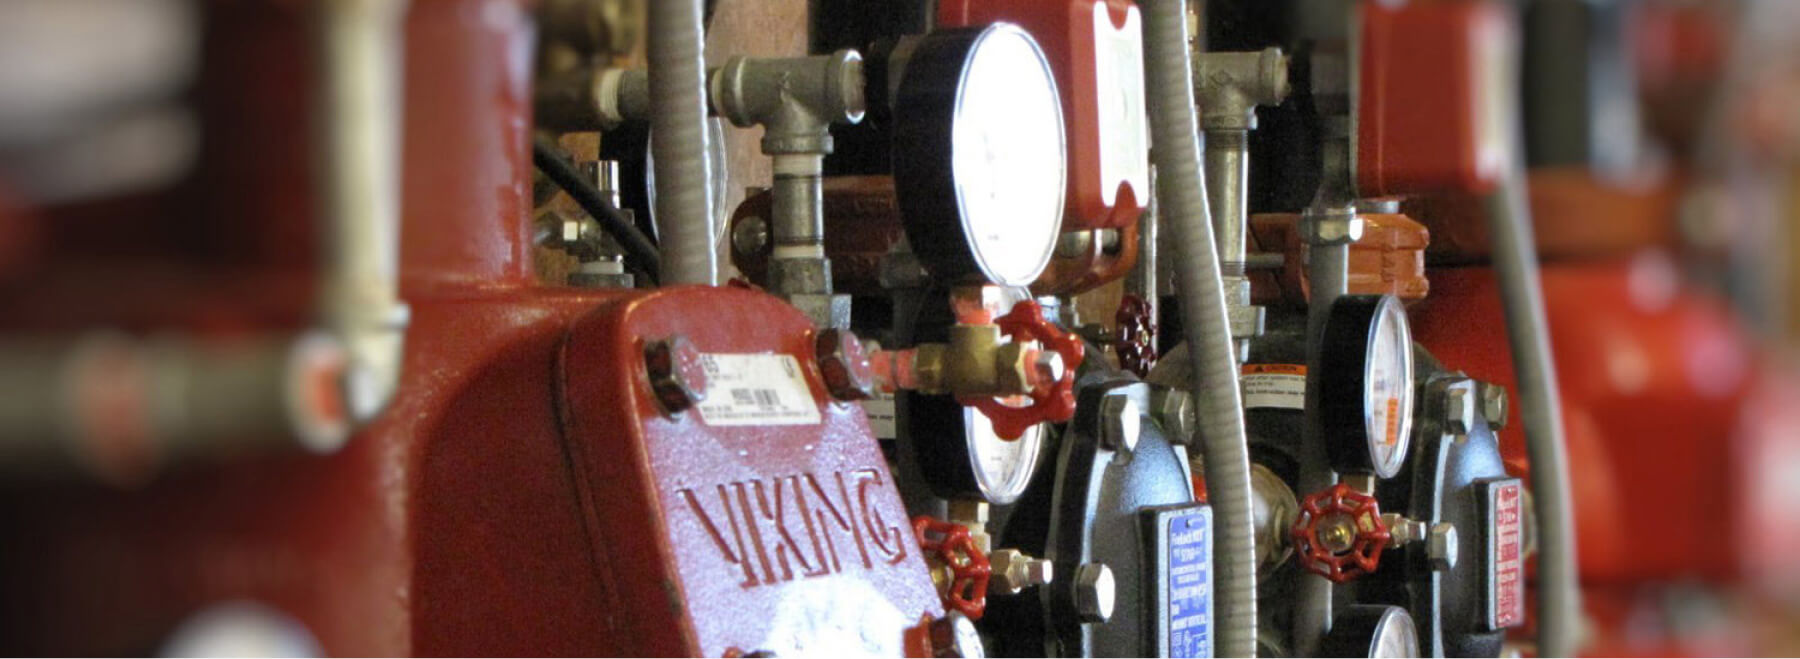 Red water pipes with pressure gauges